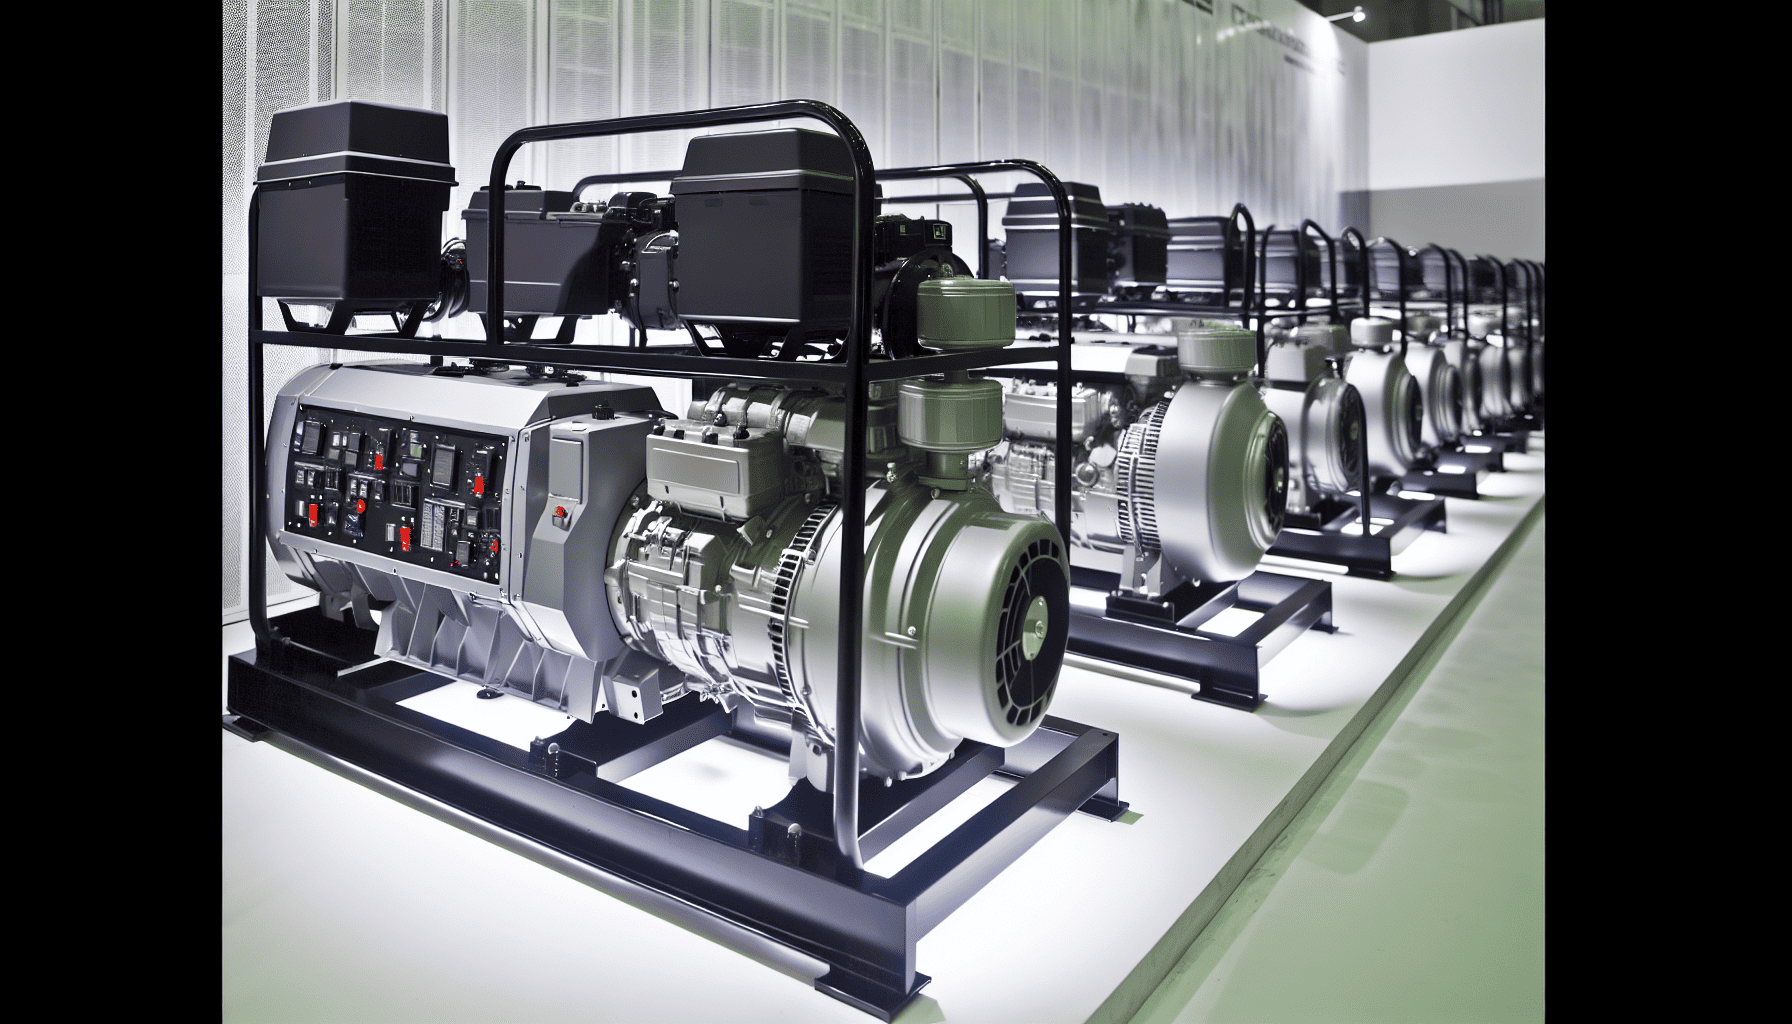 A range of PTO generators from 15 kW to 150 kW